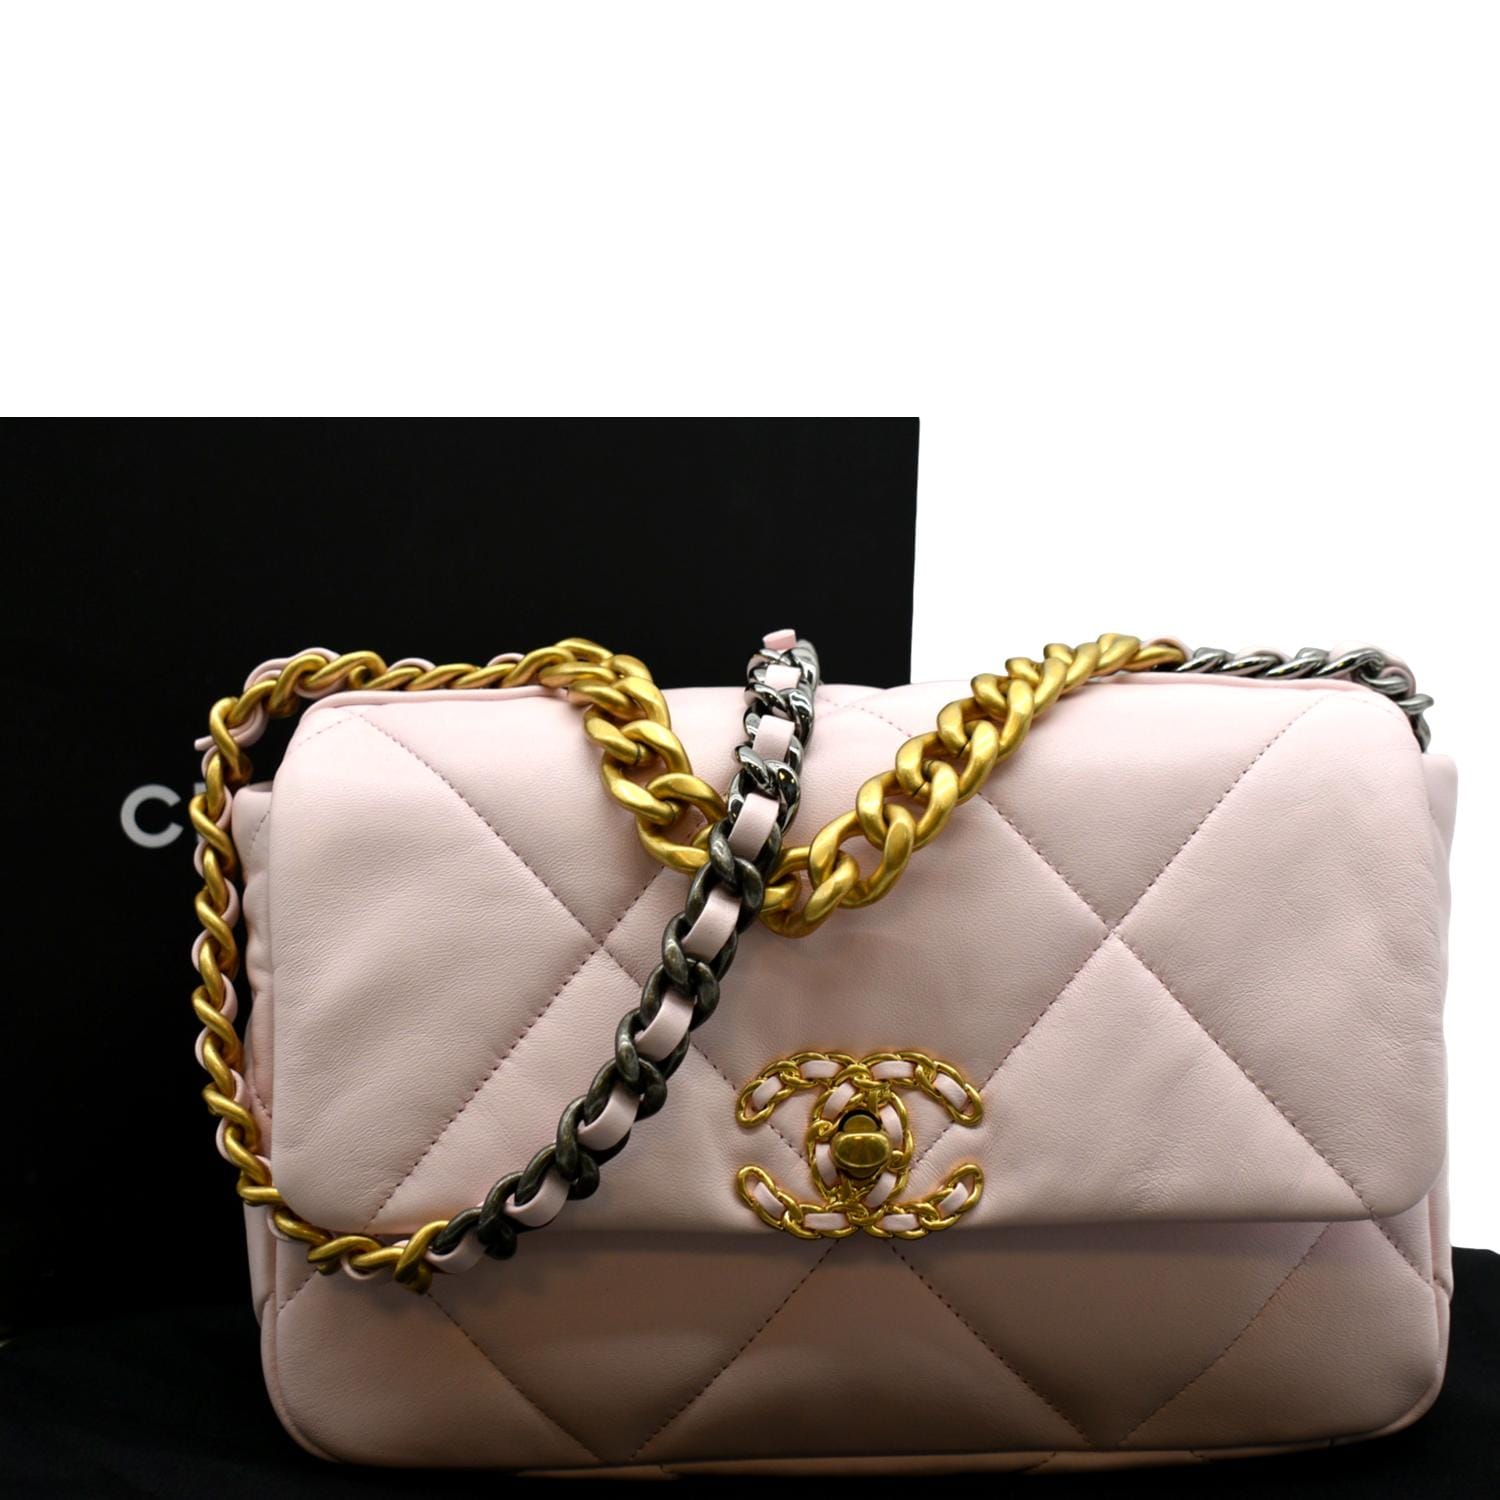 Chanel 19 leather handbag Chanel Pink in Leather - 33900524